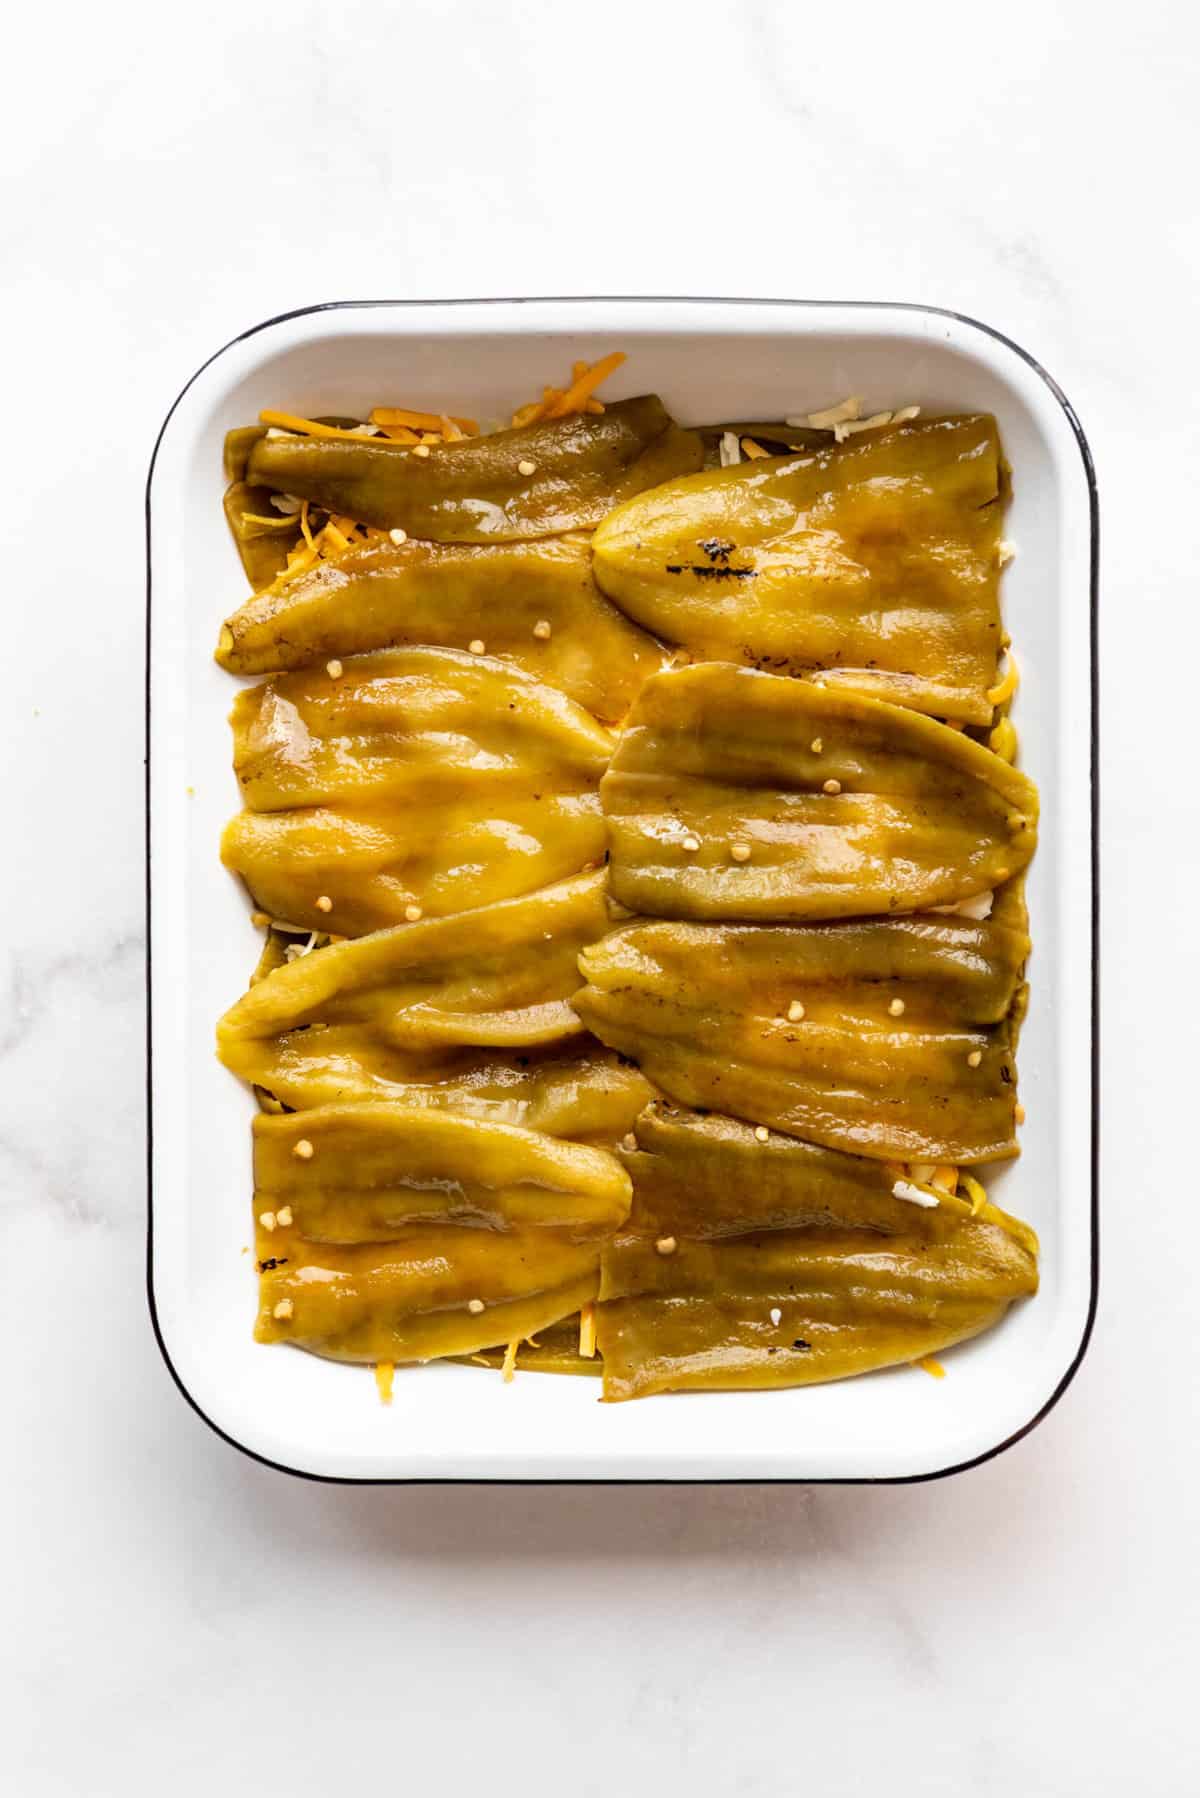 Repeating layers of green chiles in a casserole dish to make chile rellenos casserole.